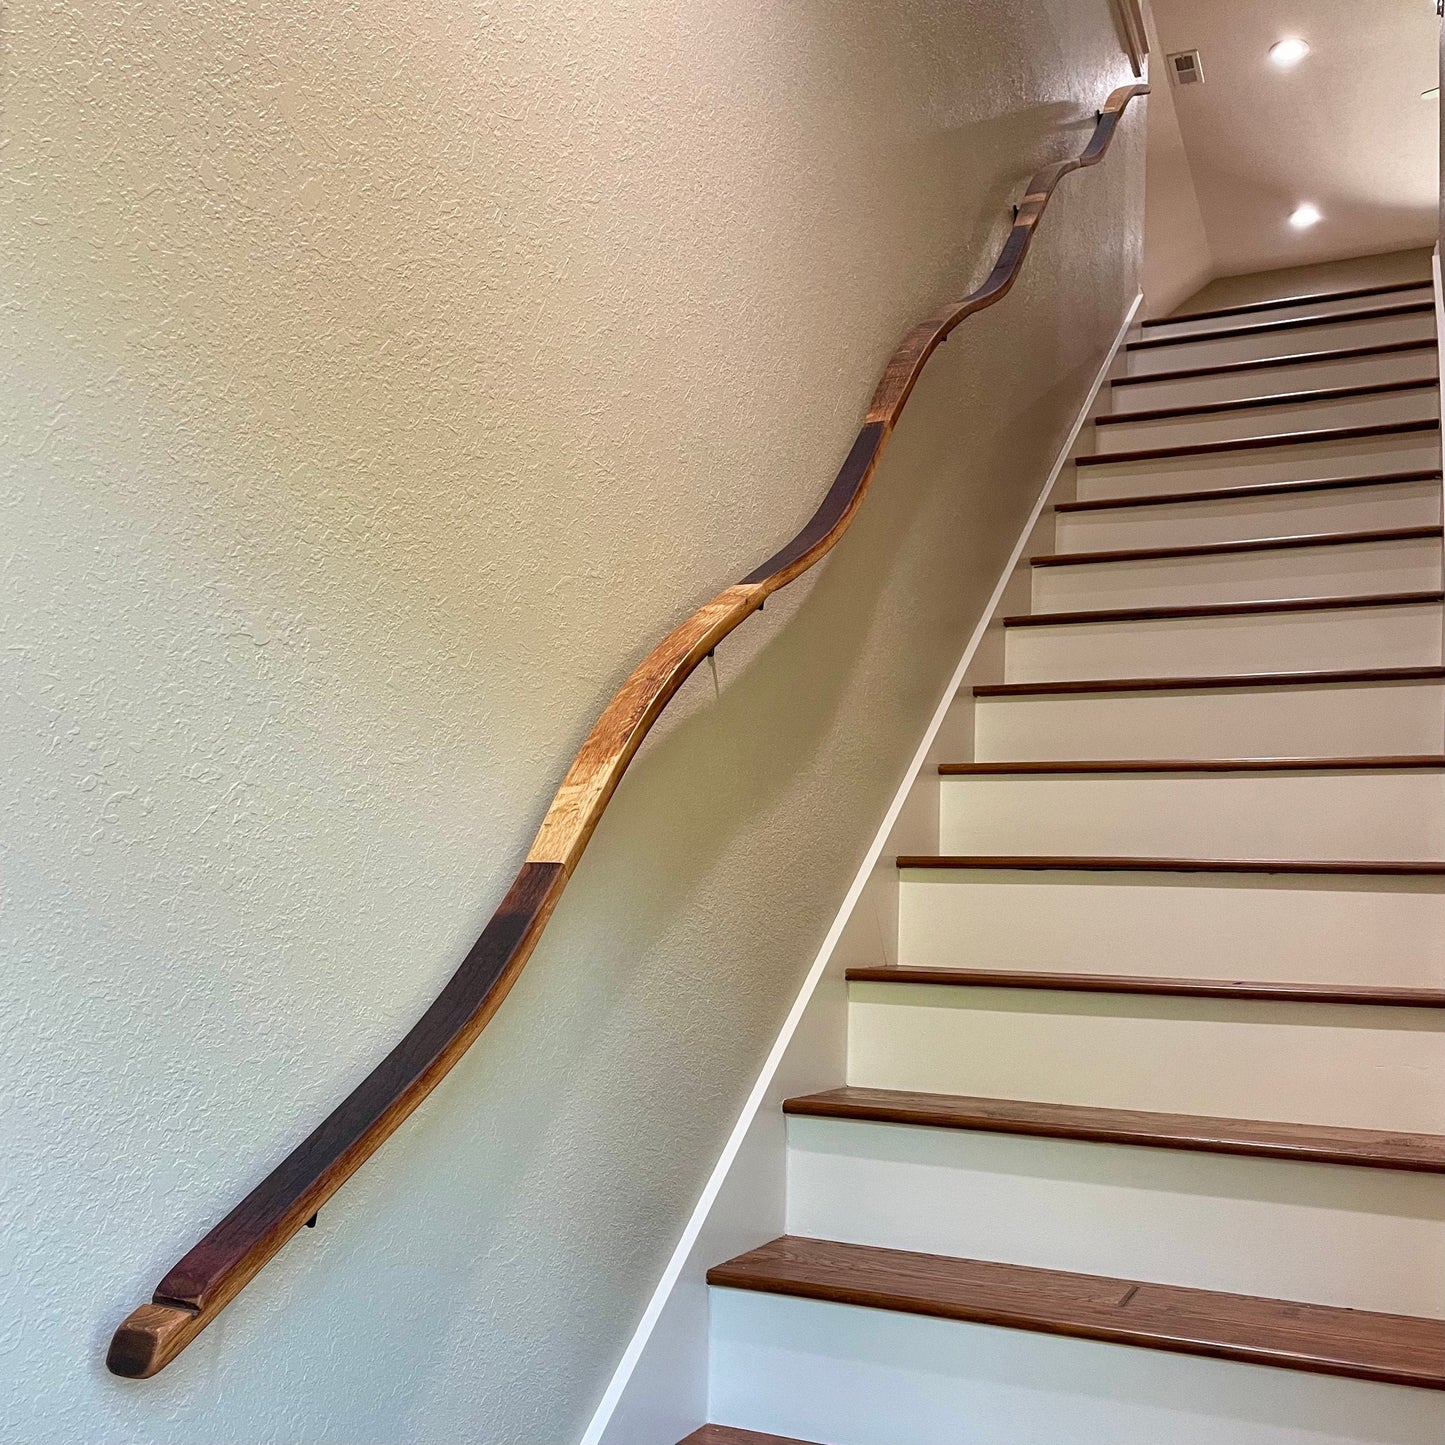 SALE Wine Barrel Stair Handrails - Barana - Made from retired California wine barrels 100% Recycled! 110223-3